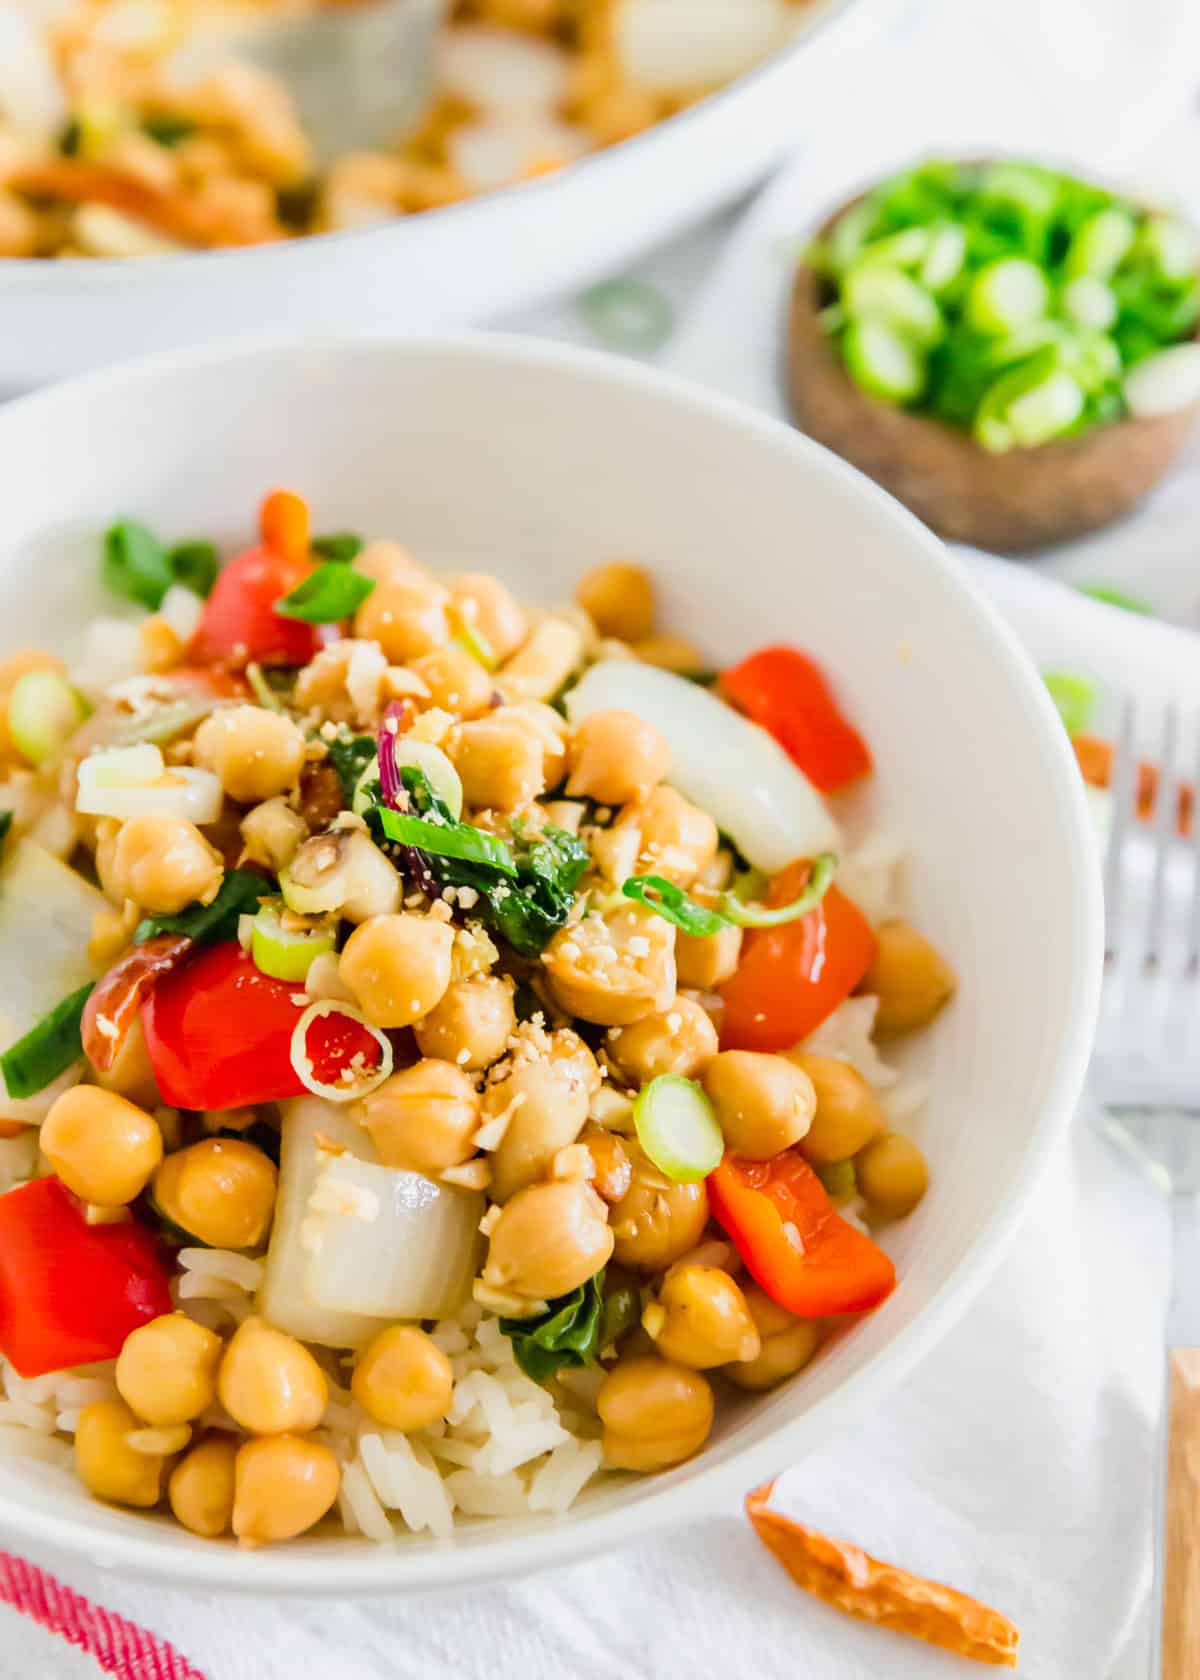 Enjoy your favorite Chinese takeout meal with a vegan twist in this Kung Pao chickpea recipe. The sauce is a perfect recreation with tons of bold flavors making this dish taste just like the original with a simple protein swap!